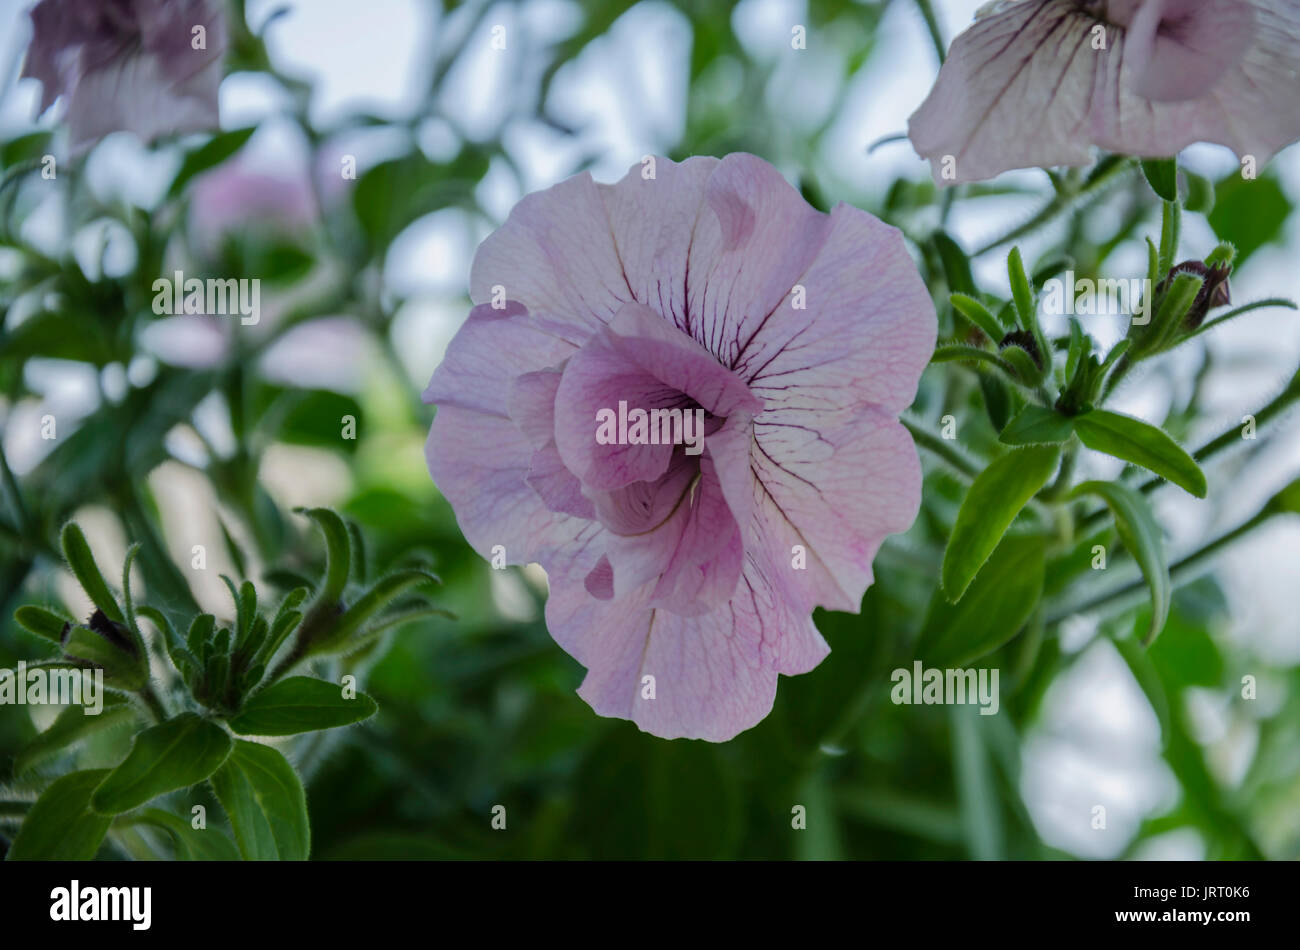 Ornamental garden beautiful bush of blooming pink petunias with green leaves on a background of green leaves Stock Photo